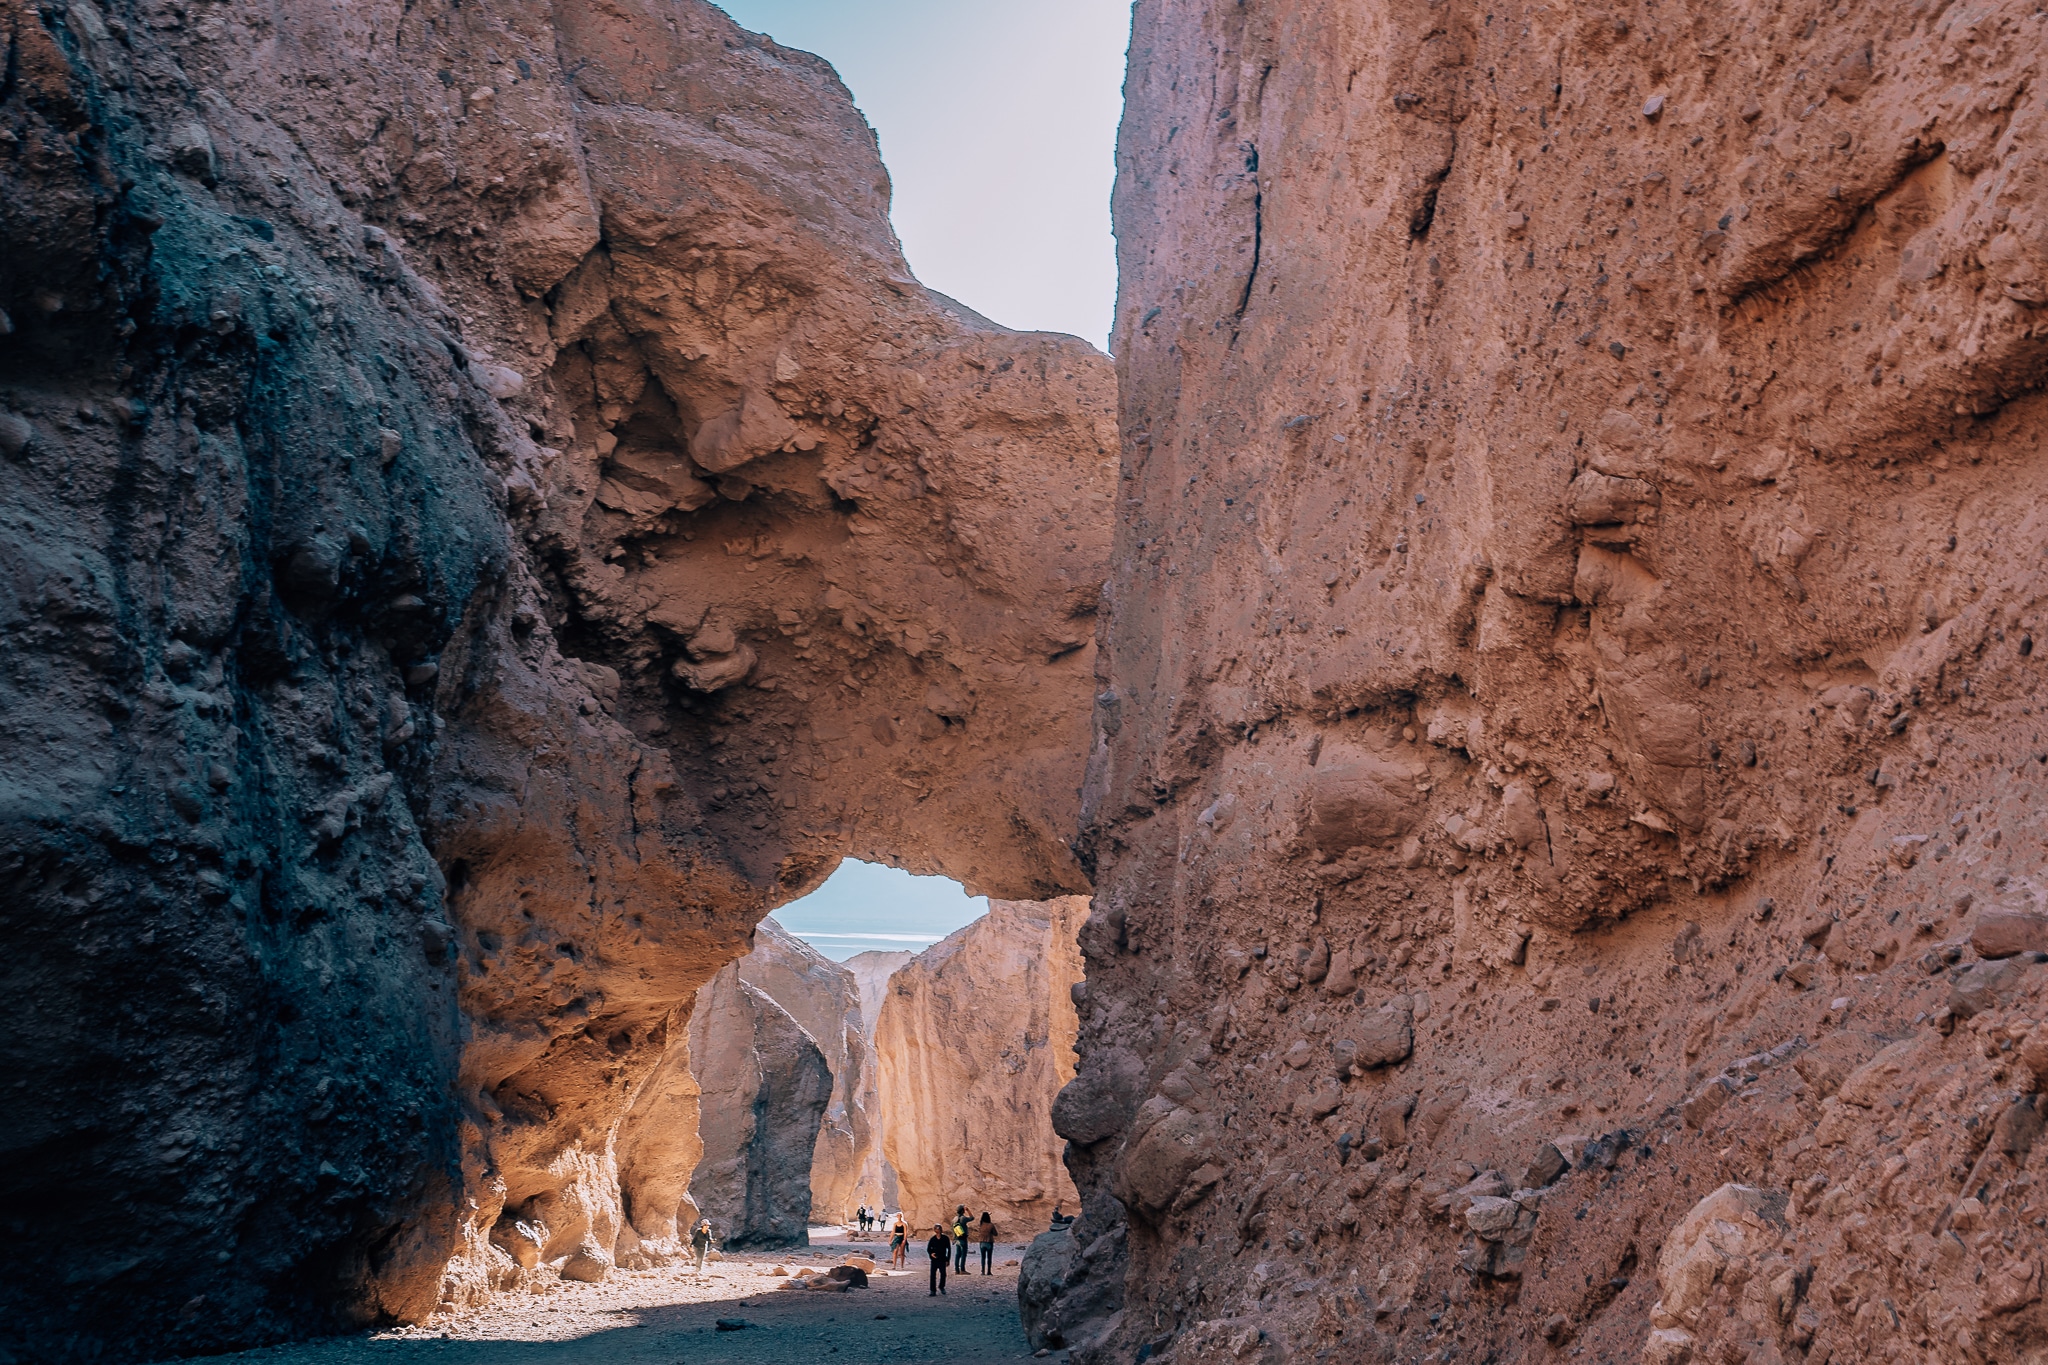 A large natural arch connecting two sides of a large orange canyon with people walking underneath at Death Valley